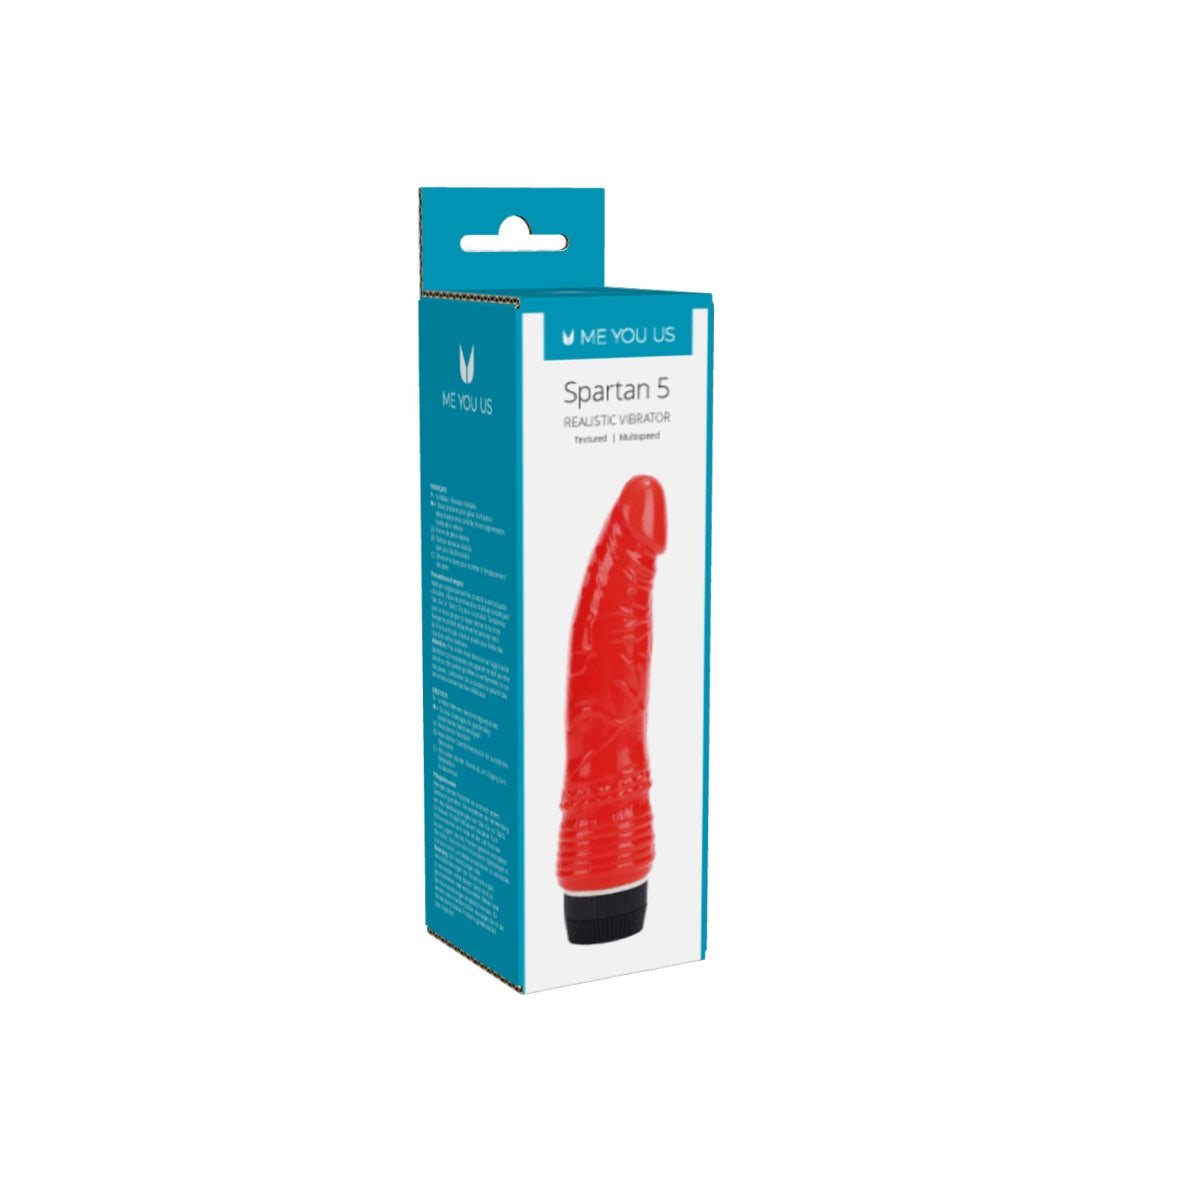 a package of a red vibrating device in a cardboard box